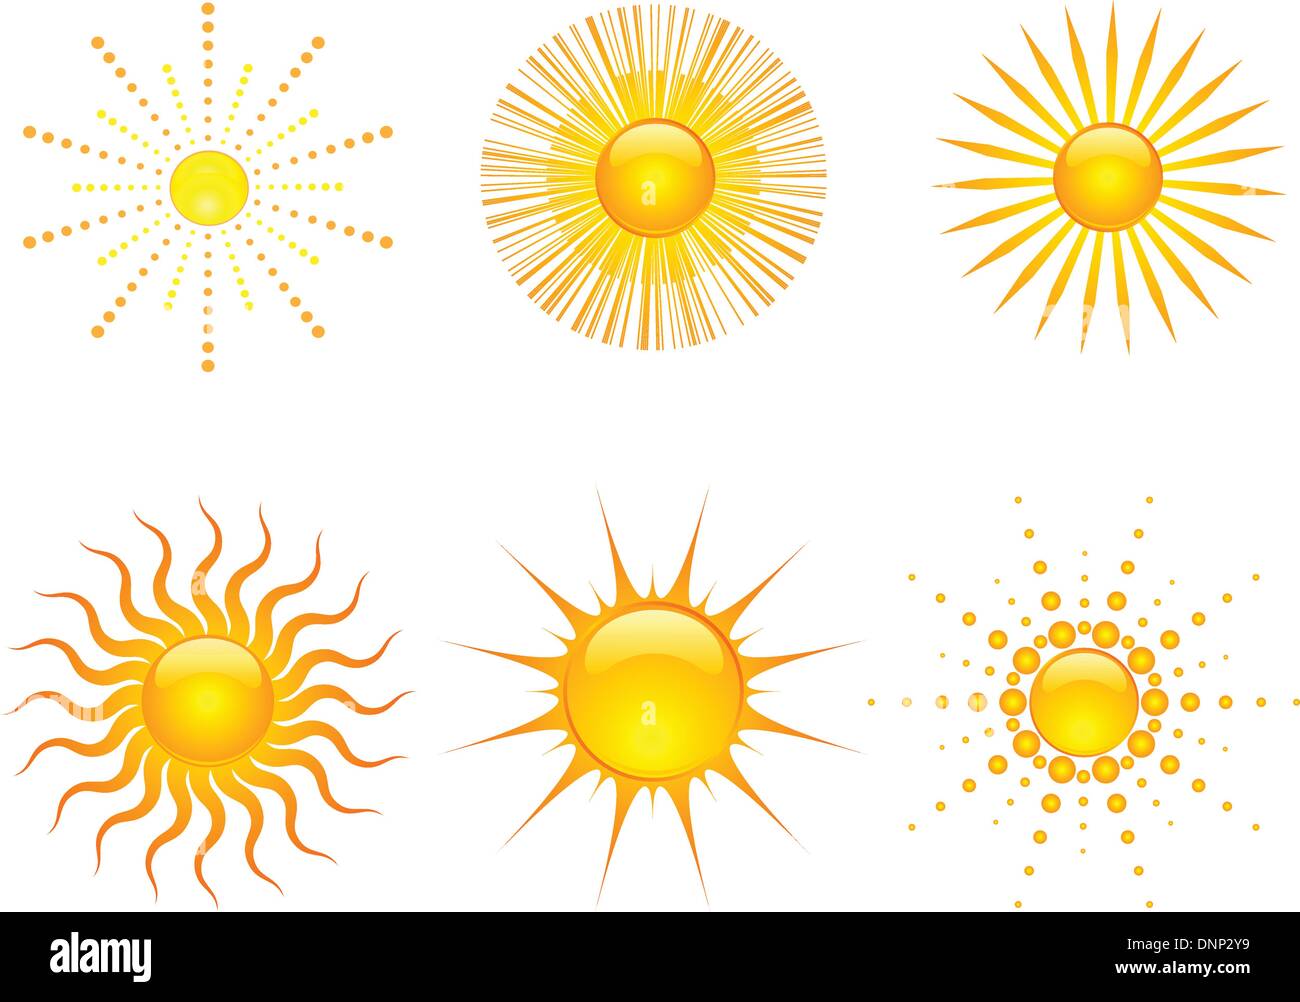 Various styles of sun icons Stock Vector